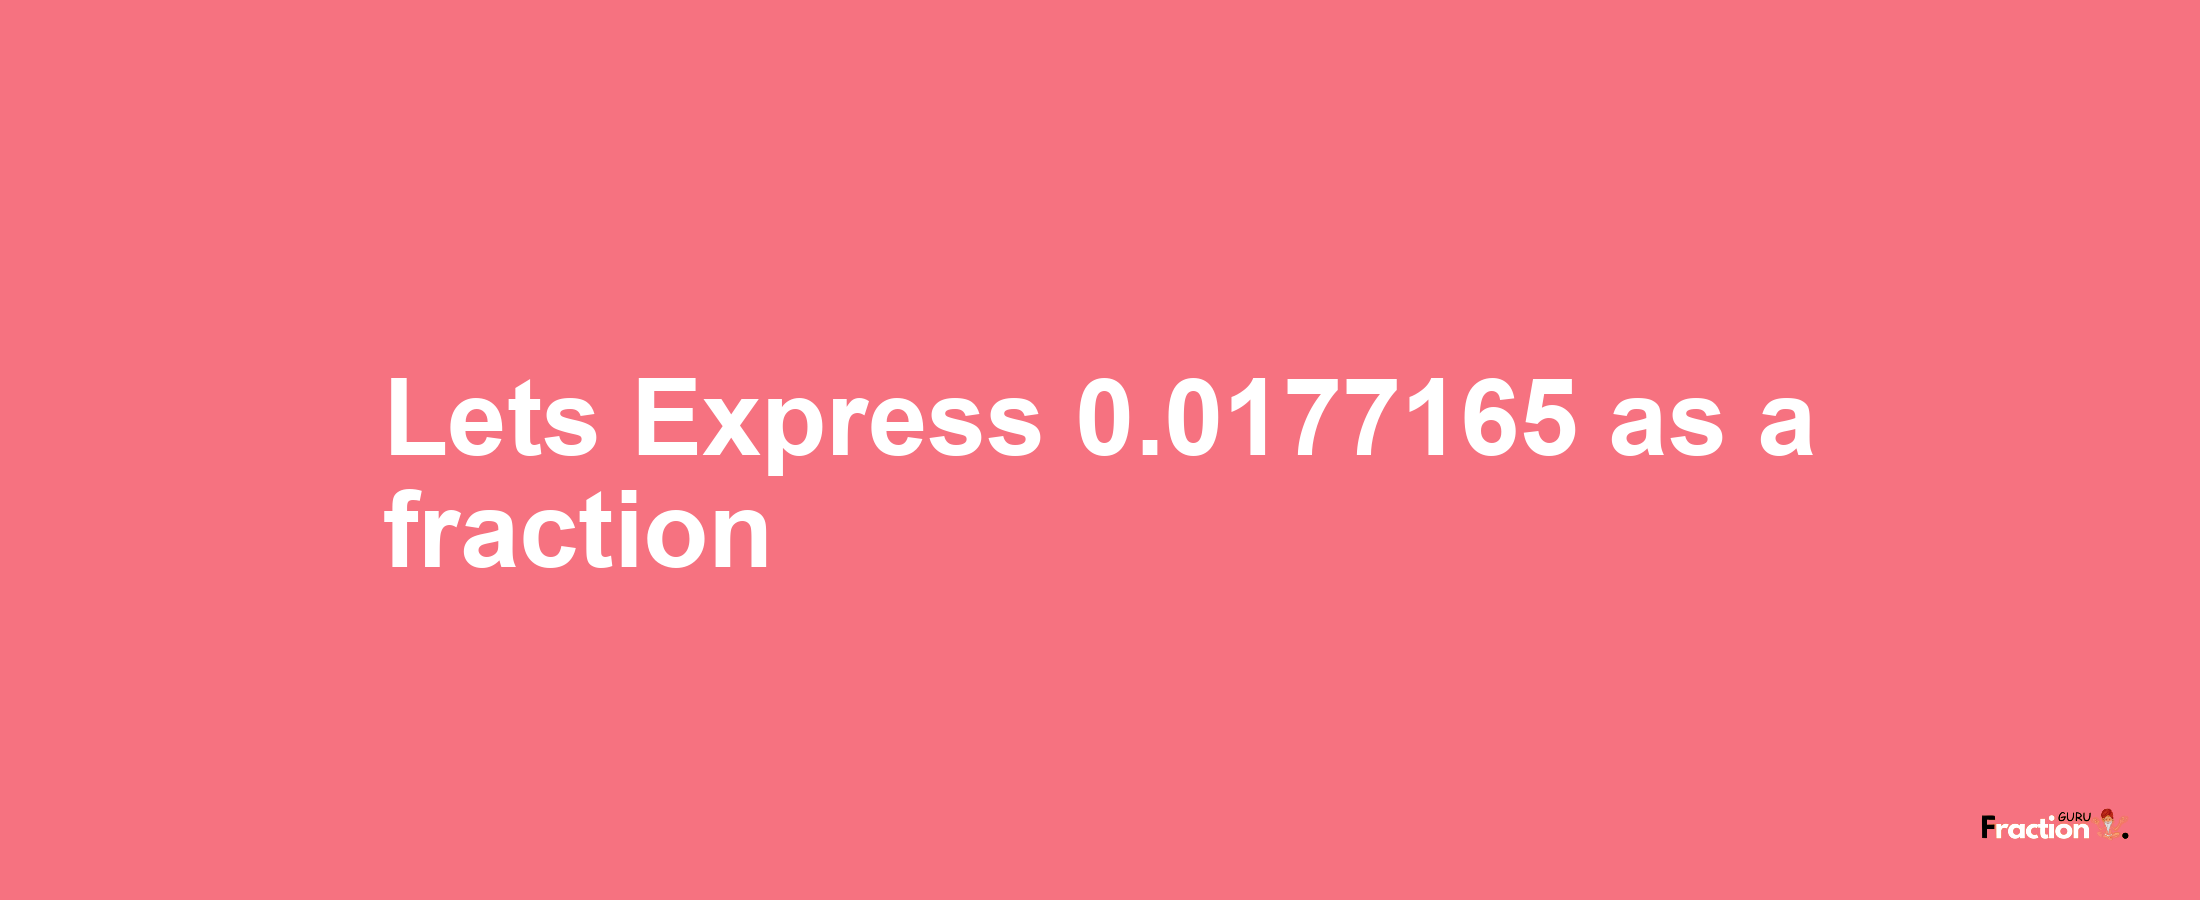 Lets Express 0.0177165 as afraction